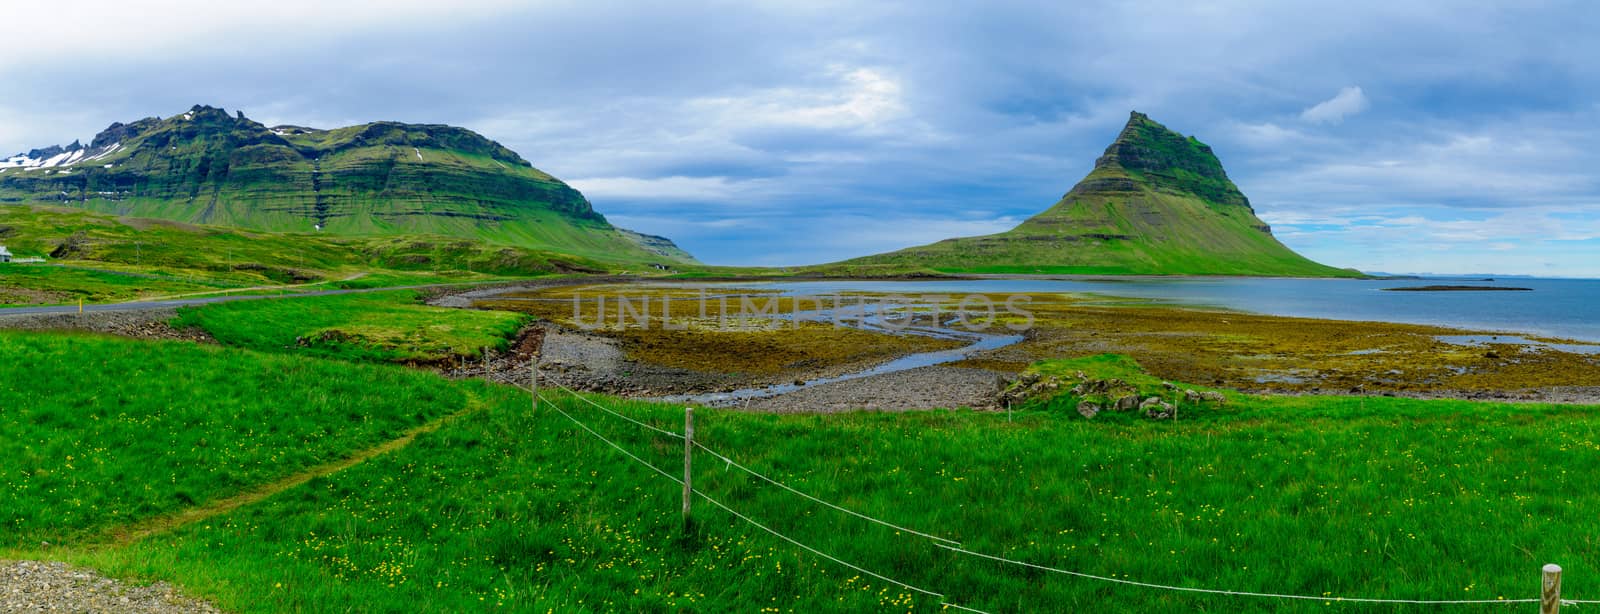 Panoramic landscape and the Kirkjufell mountain (Church mountain), in the Snaefellsnes peninsula, west Iceland